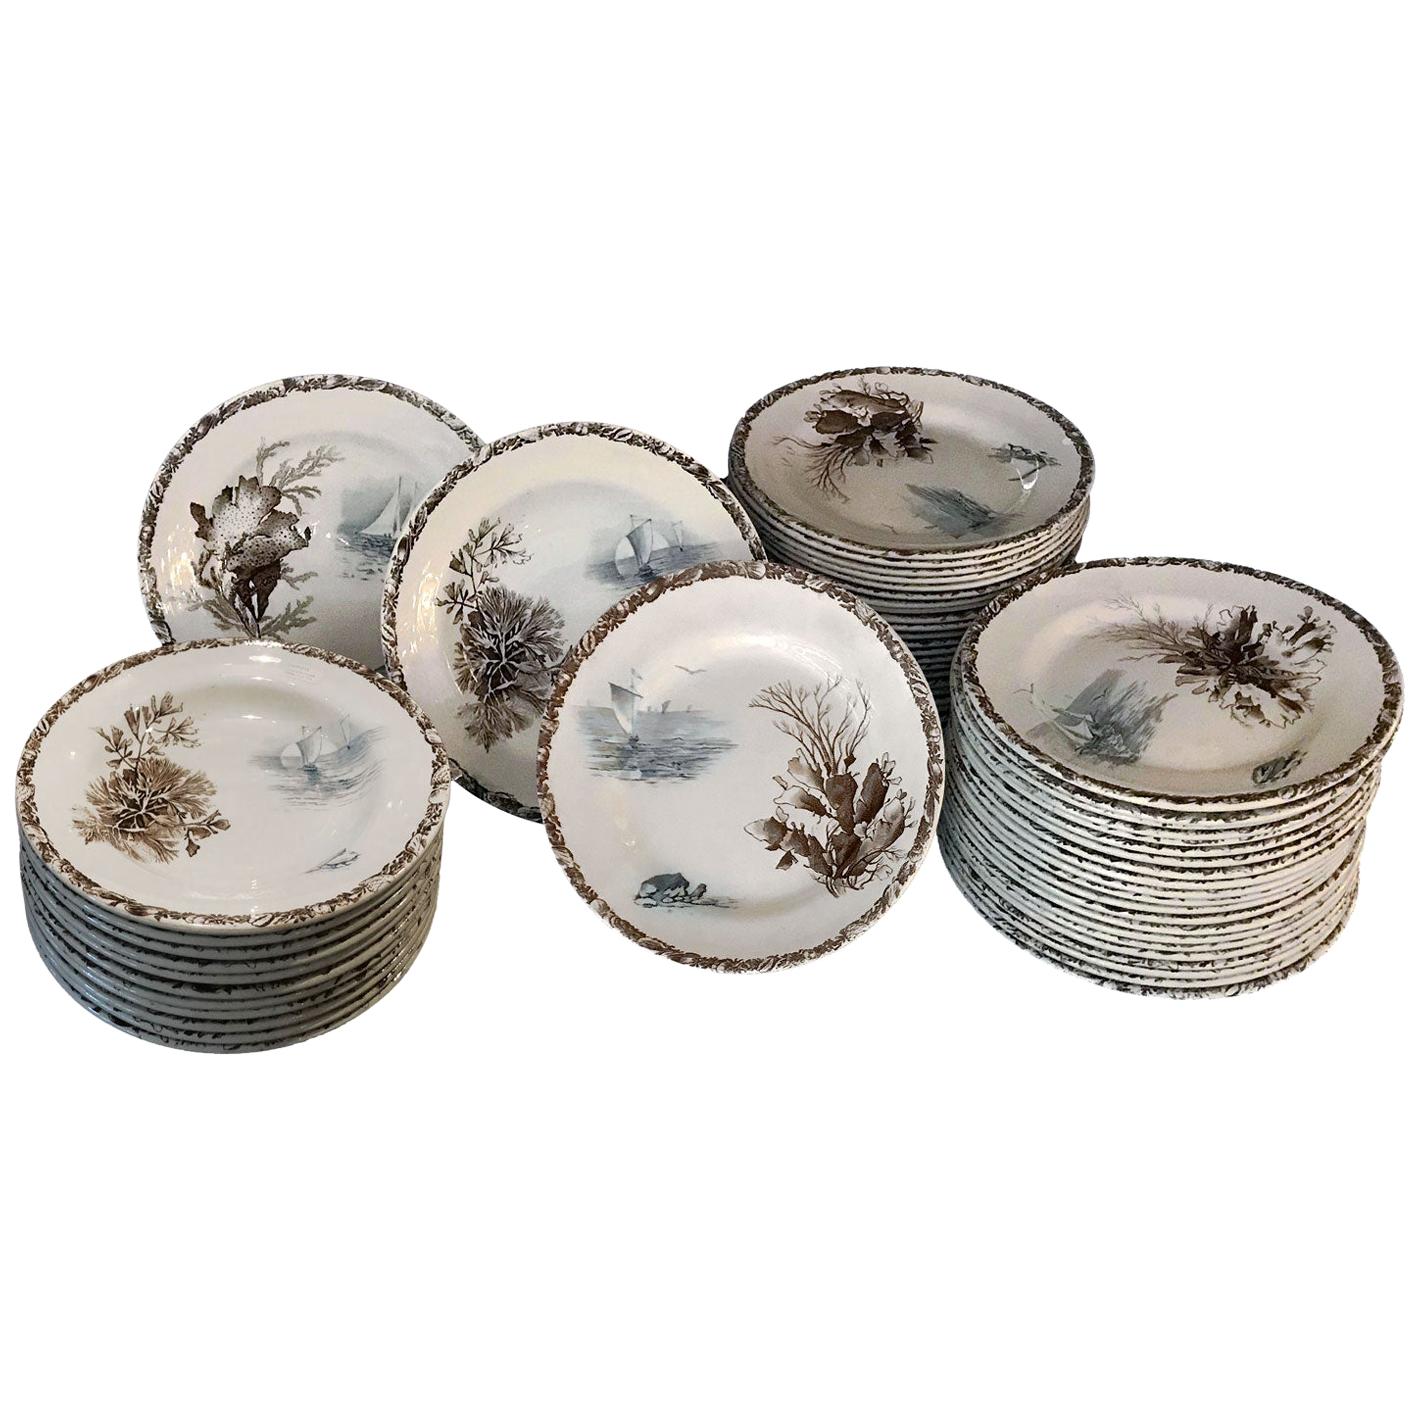 These plates by the French faience Manufacture of Choisy-le-Roi are decorated with several different interesting sepia and blue prints of algae and sailfishes are on the plates. This set is perfect for sea or sailfish lovers!
You will enjoy the sea